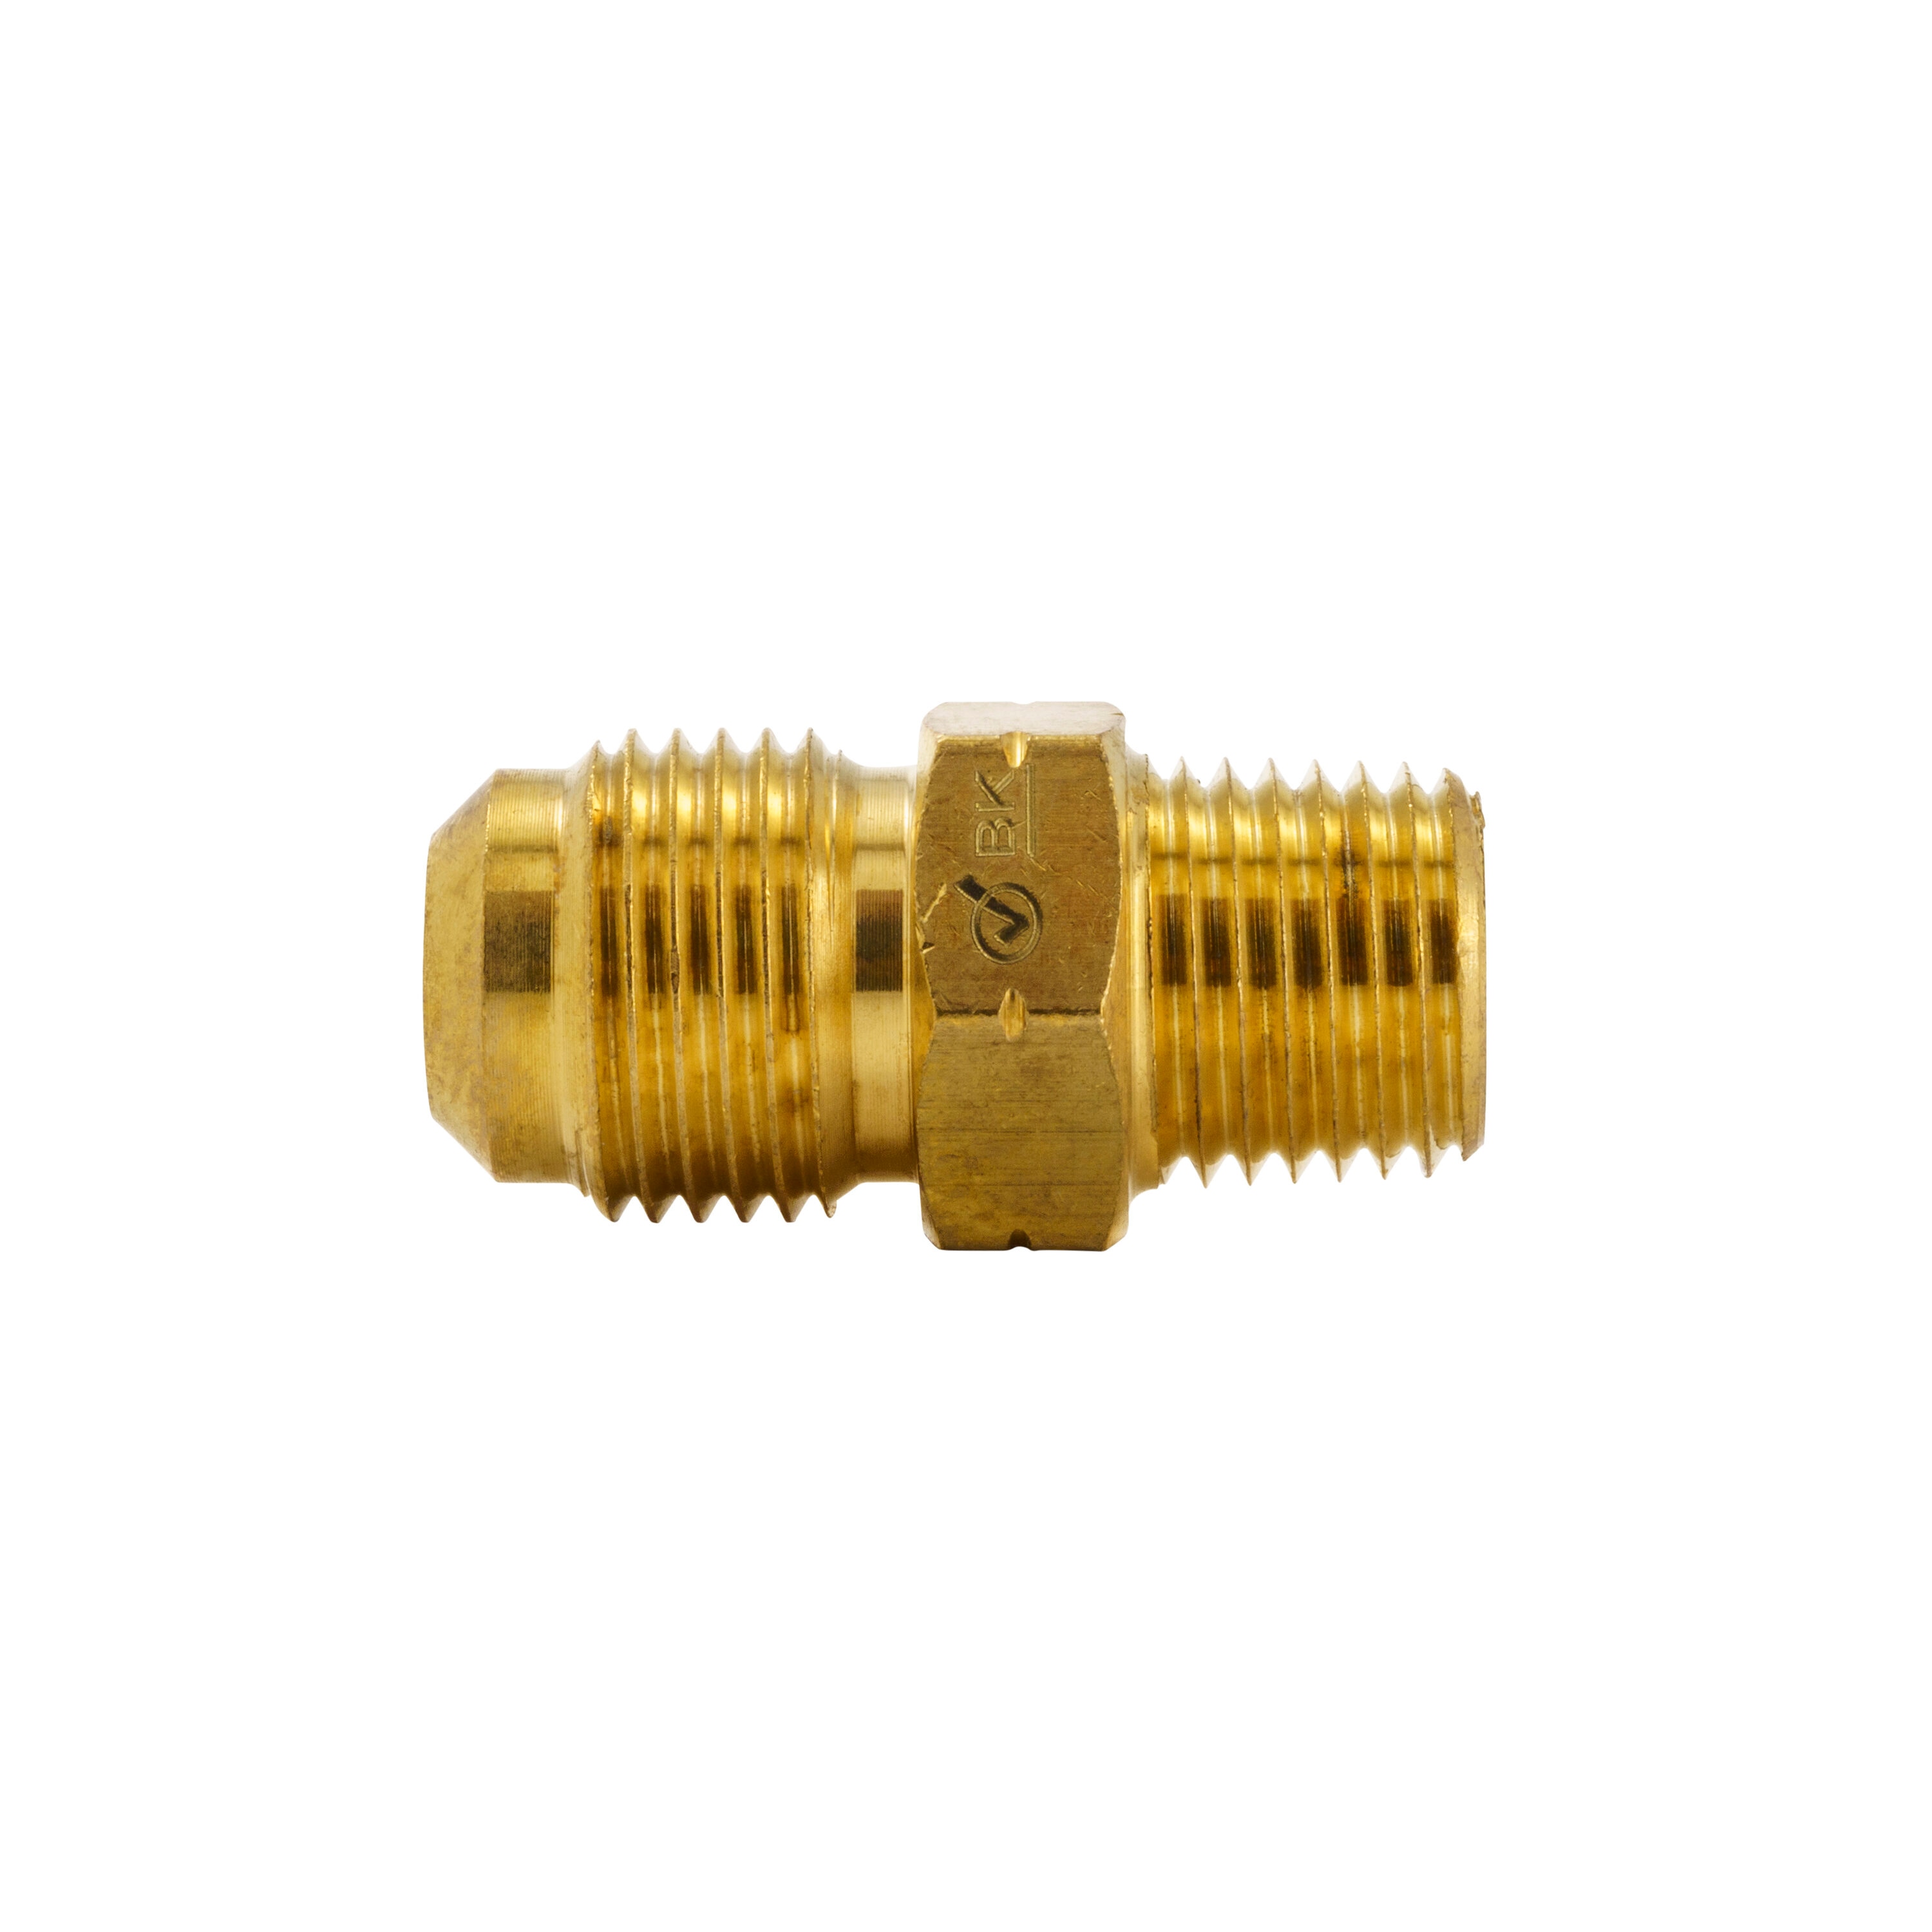 Proline Series 3/8-in x 1/2-in Threaded Coupling Fitting in the